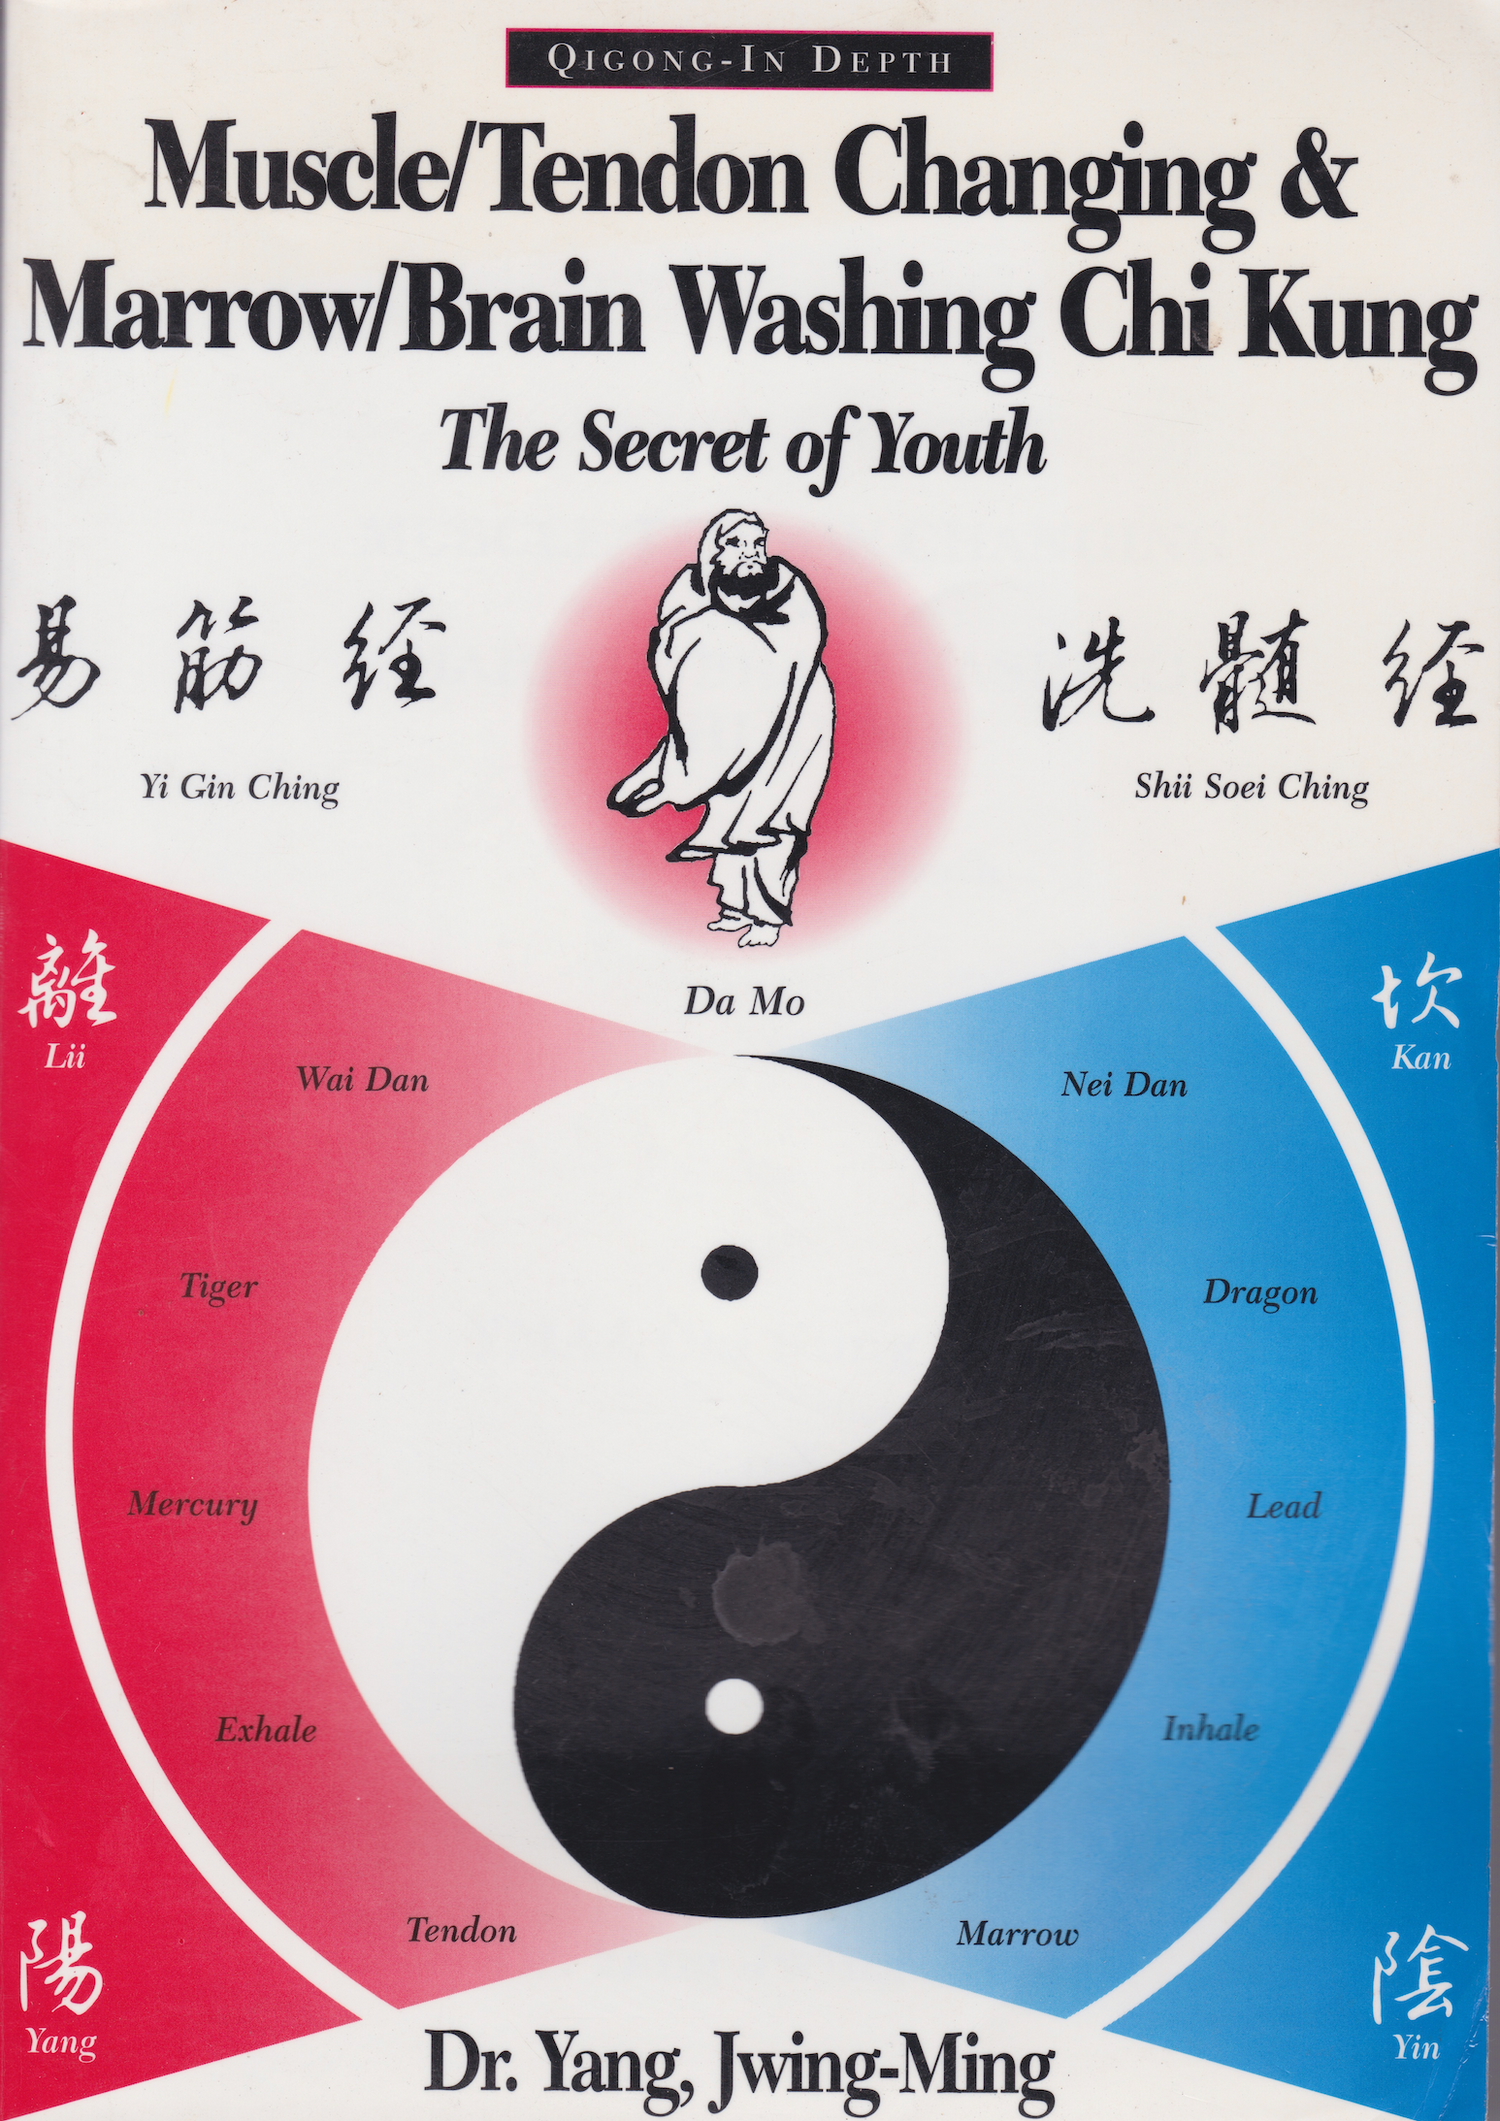 Muscle/Tendon Changing and Marrow/Brain Washing Chi Kung: The Secret of Youth Book by Dr Yang, Jwing-Ming (Preowned))